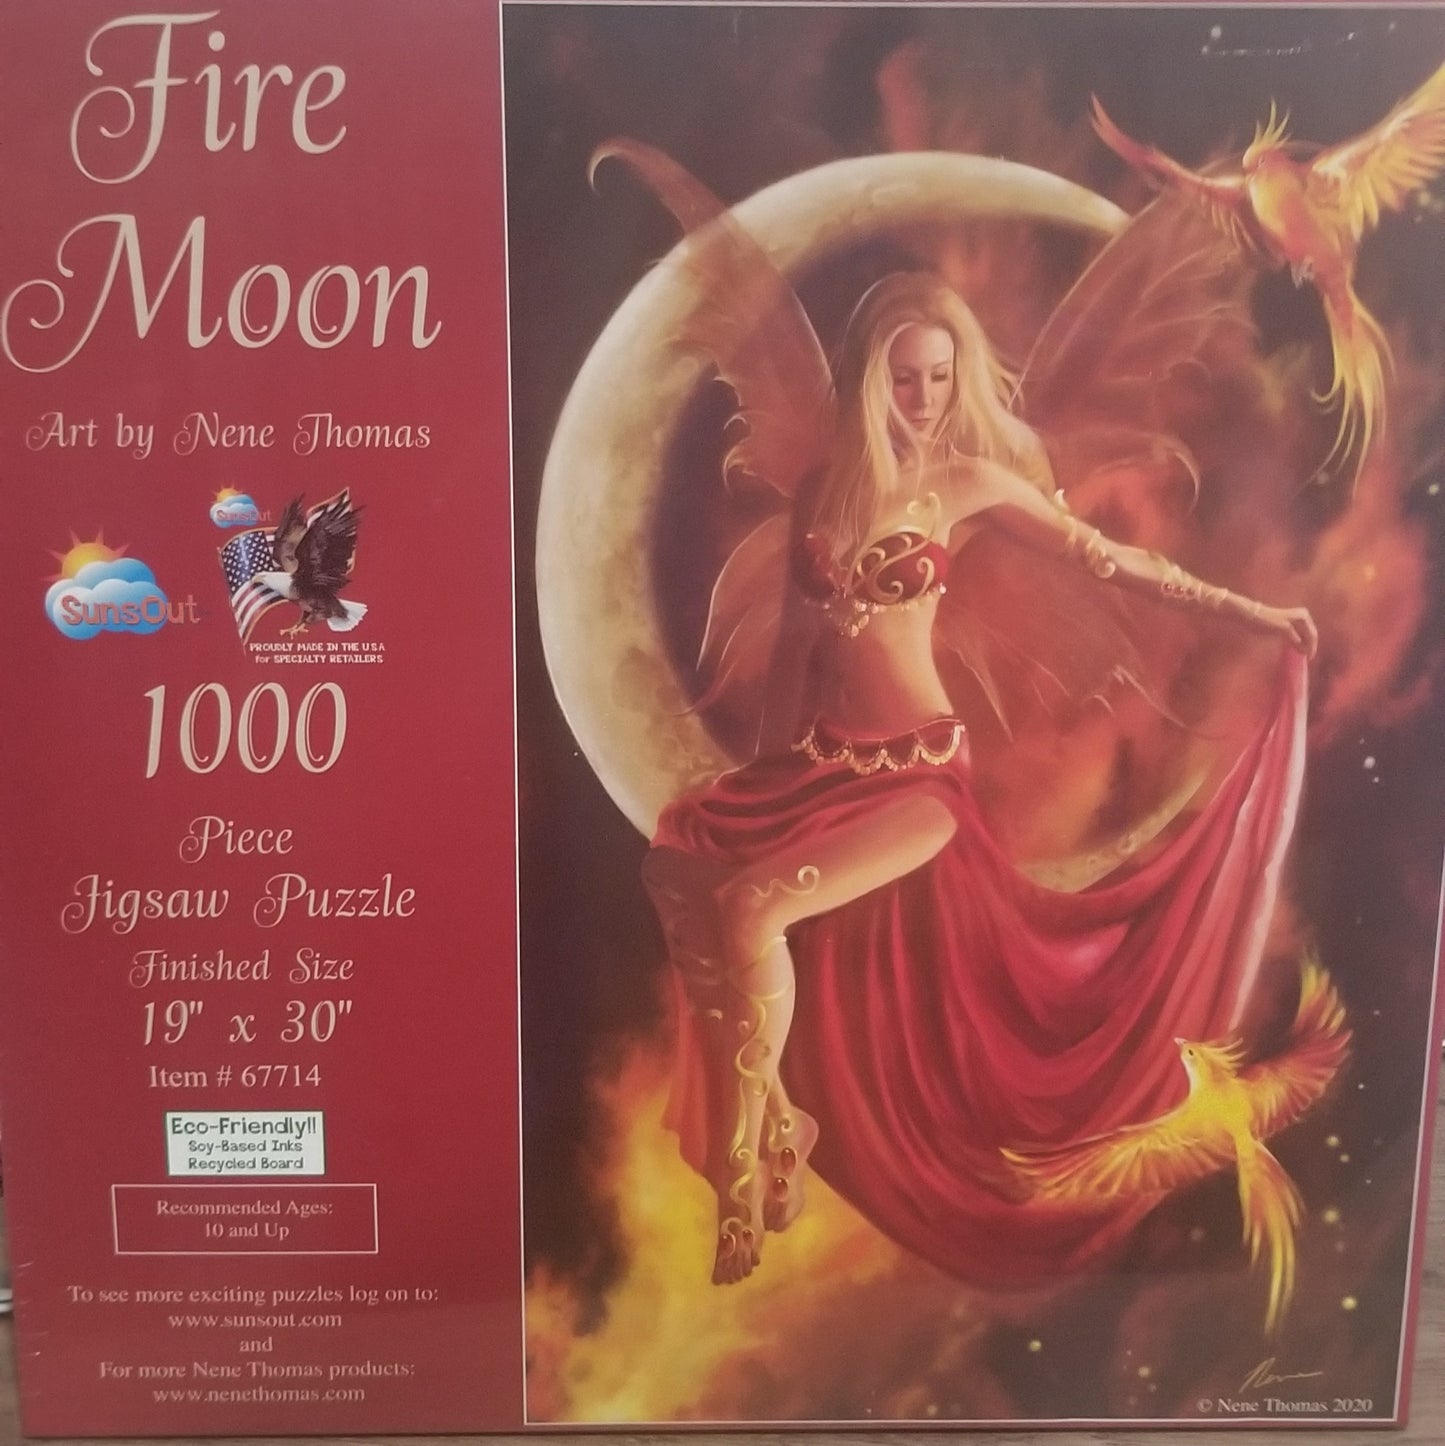 Fire Moon by Nene Thomas, 1000 Piece Puzzle